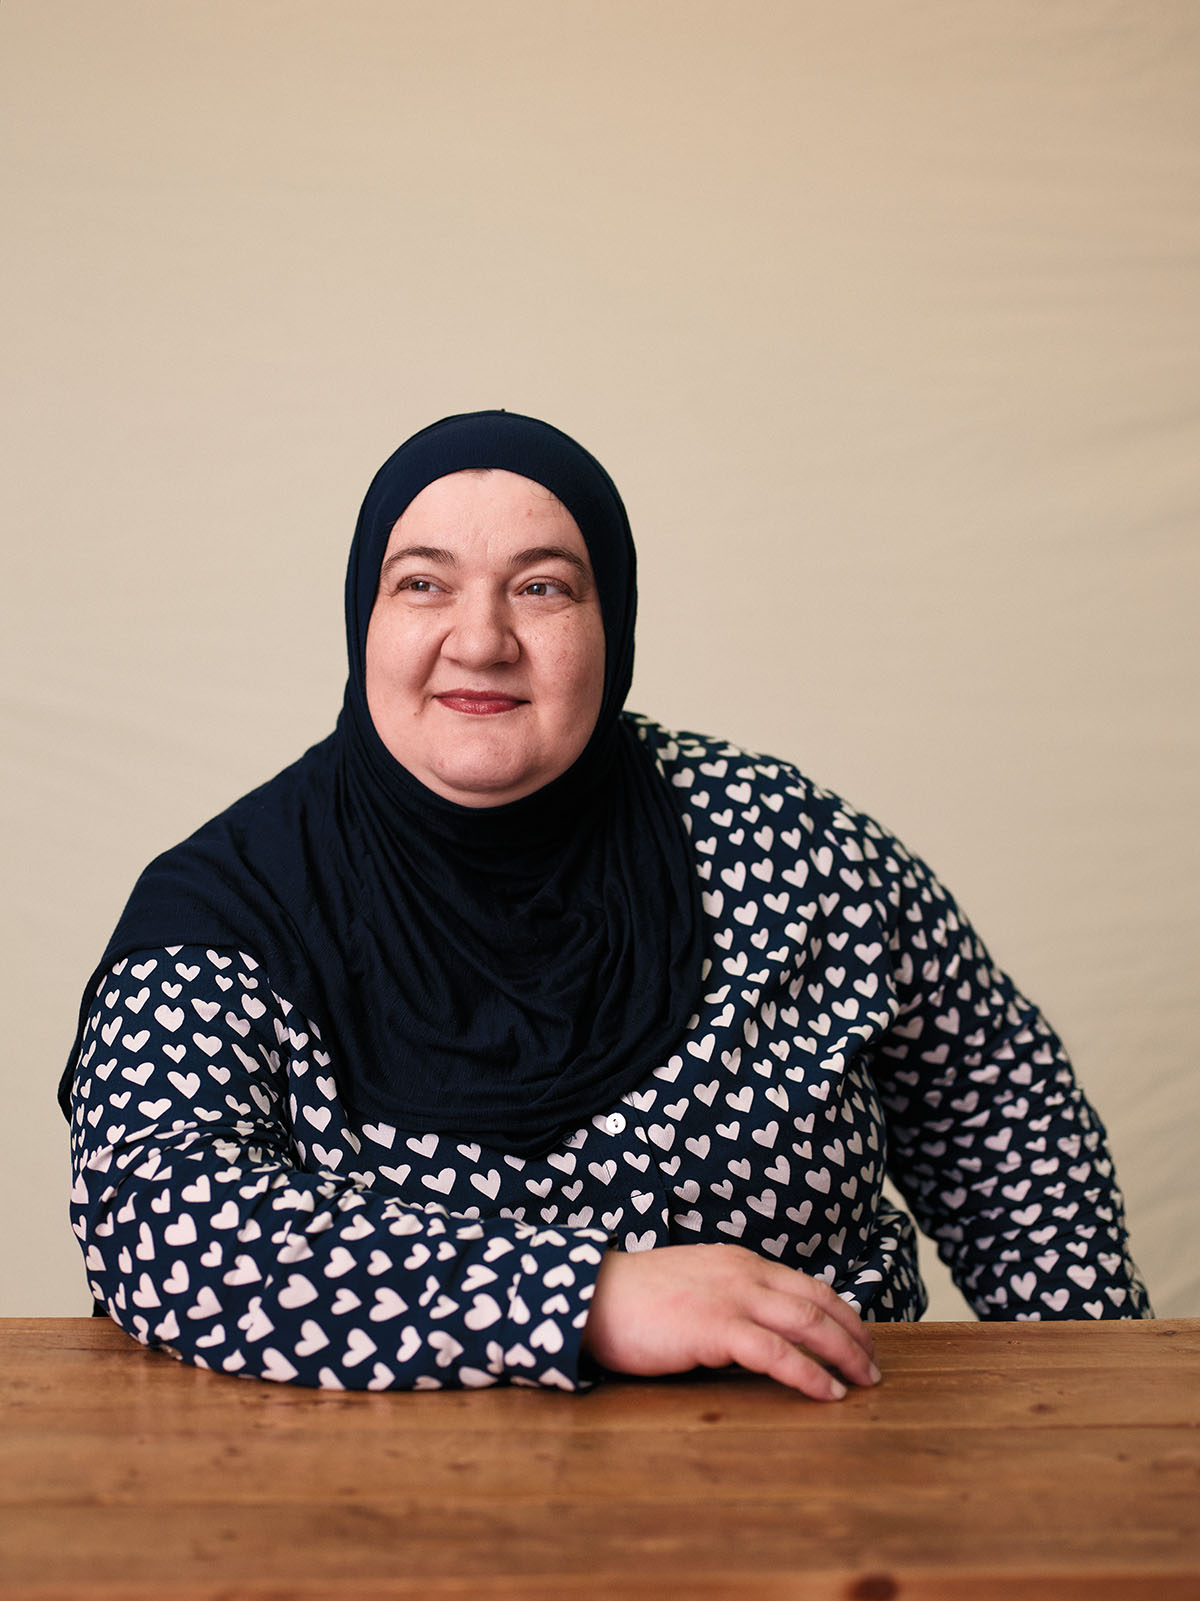 A woman in a black hijab and black and white patterned shirt looks into the distance past the camera